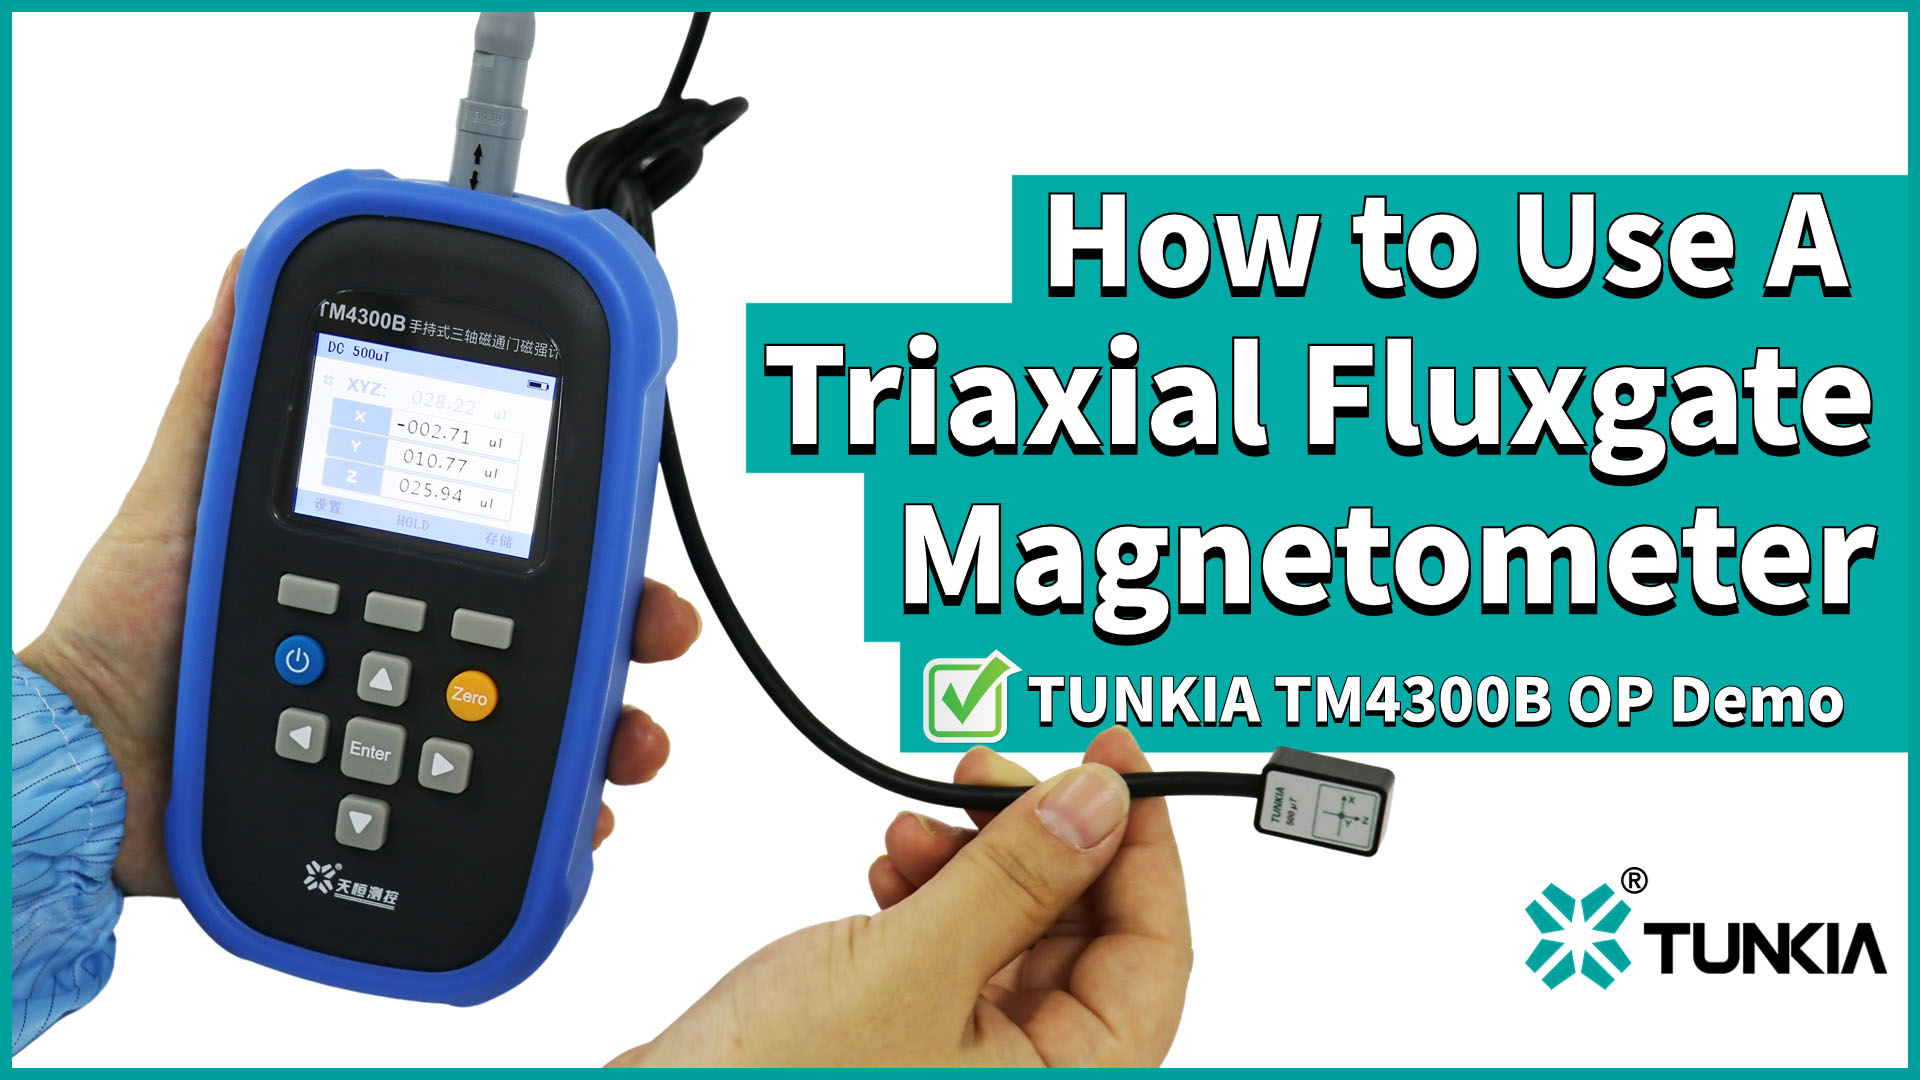 How to Use A Triaxial Fluxgate Magnetometer-TUNKIA TM4300B 